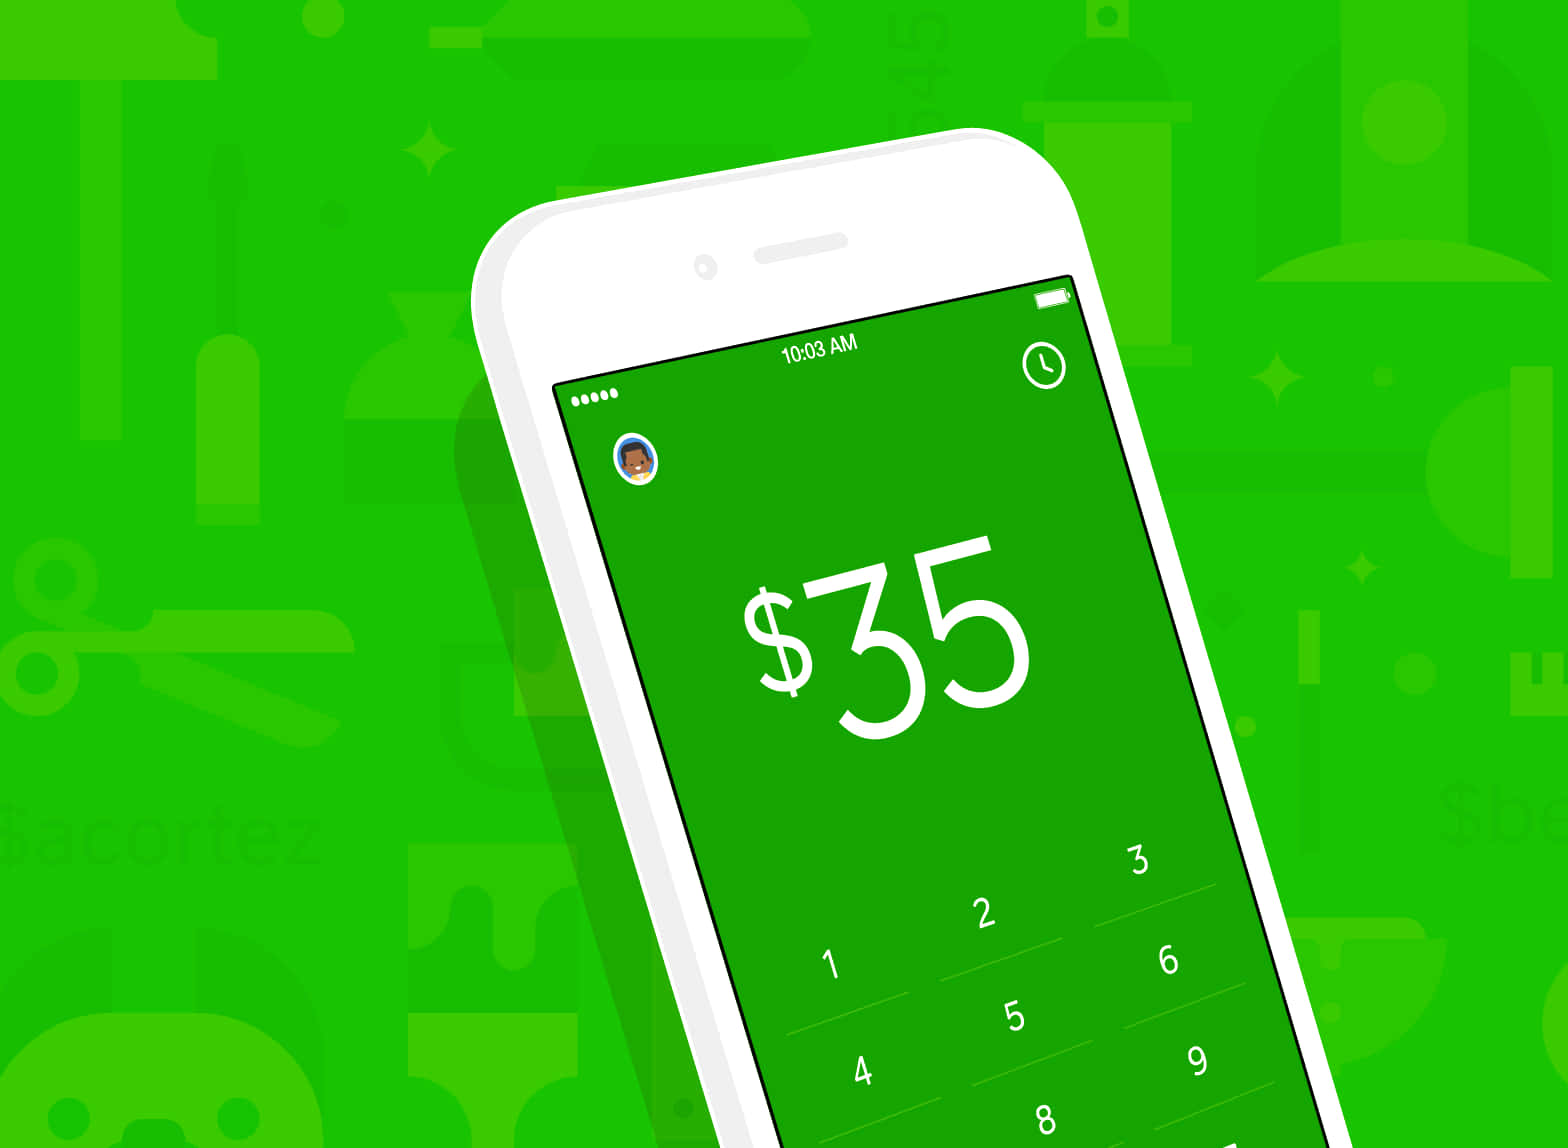 A Green Phone With A Green Screen Showing A $55 Bill